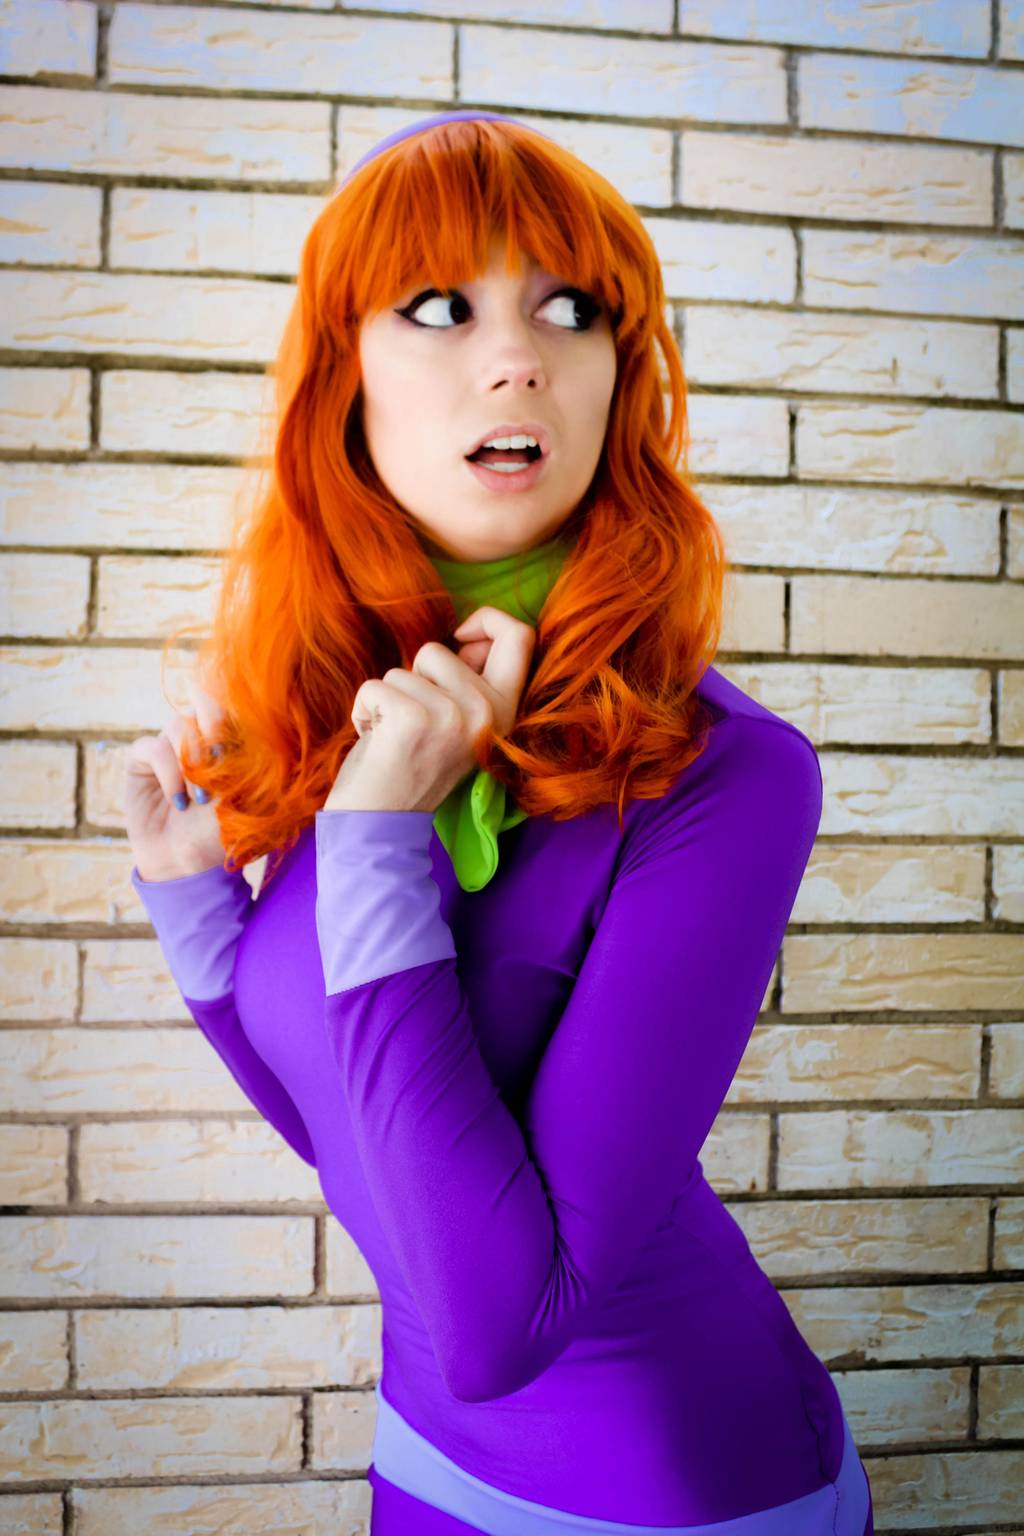 70+ Hot Pictures Of Daphne Blake From Scooby Doo Which Are Sure to Catch Your Attention 38